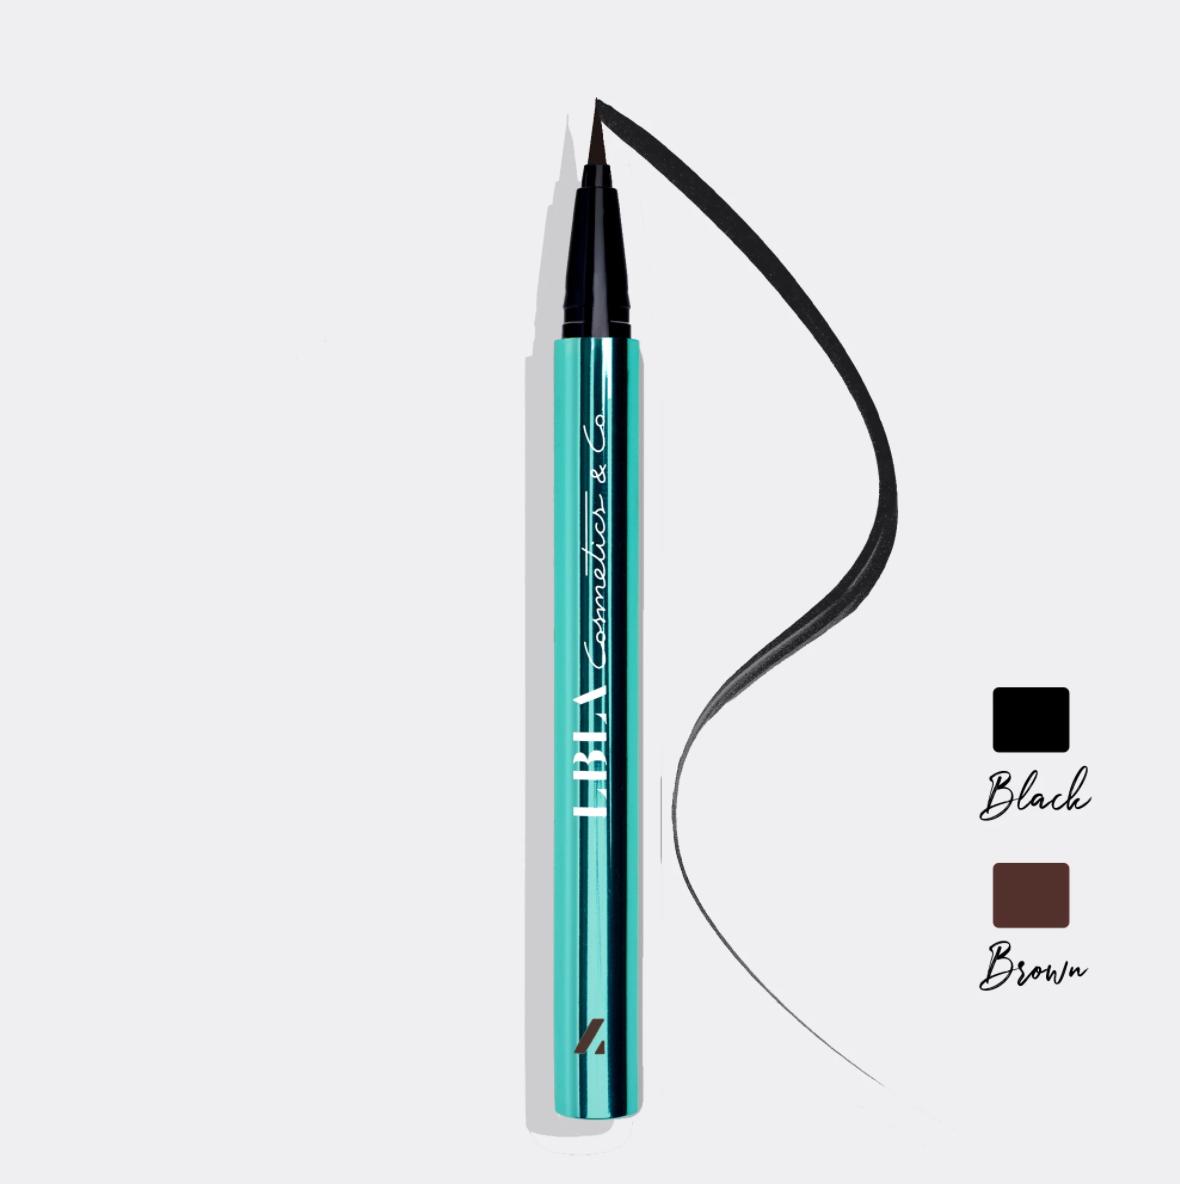 LBLA Cosmetics - Everlasting Eyeliner, Smudge proof long wearing, available in Black or Brown